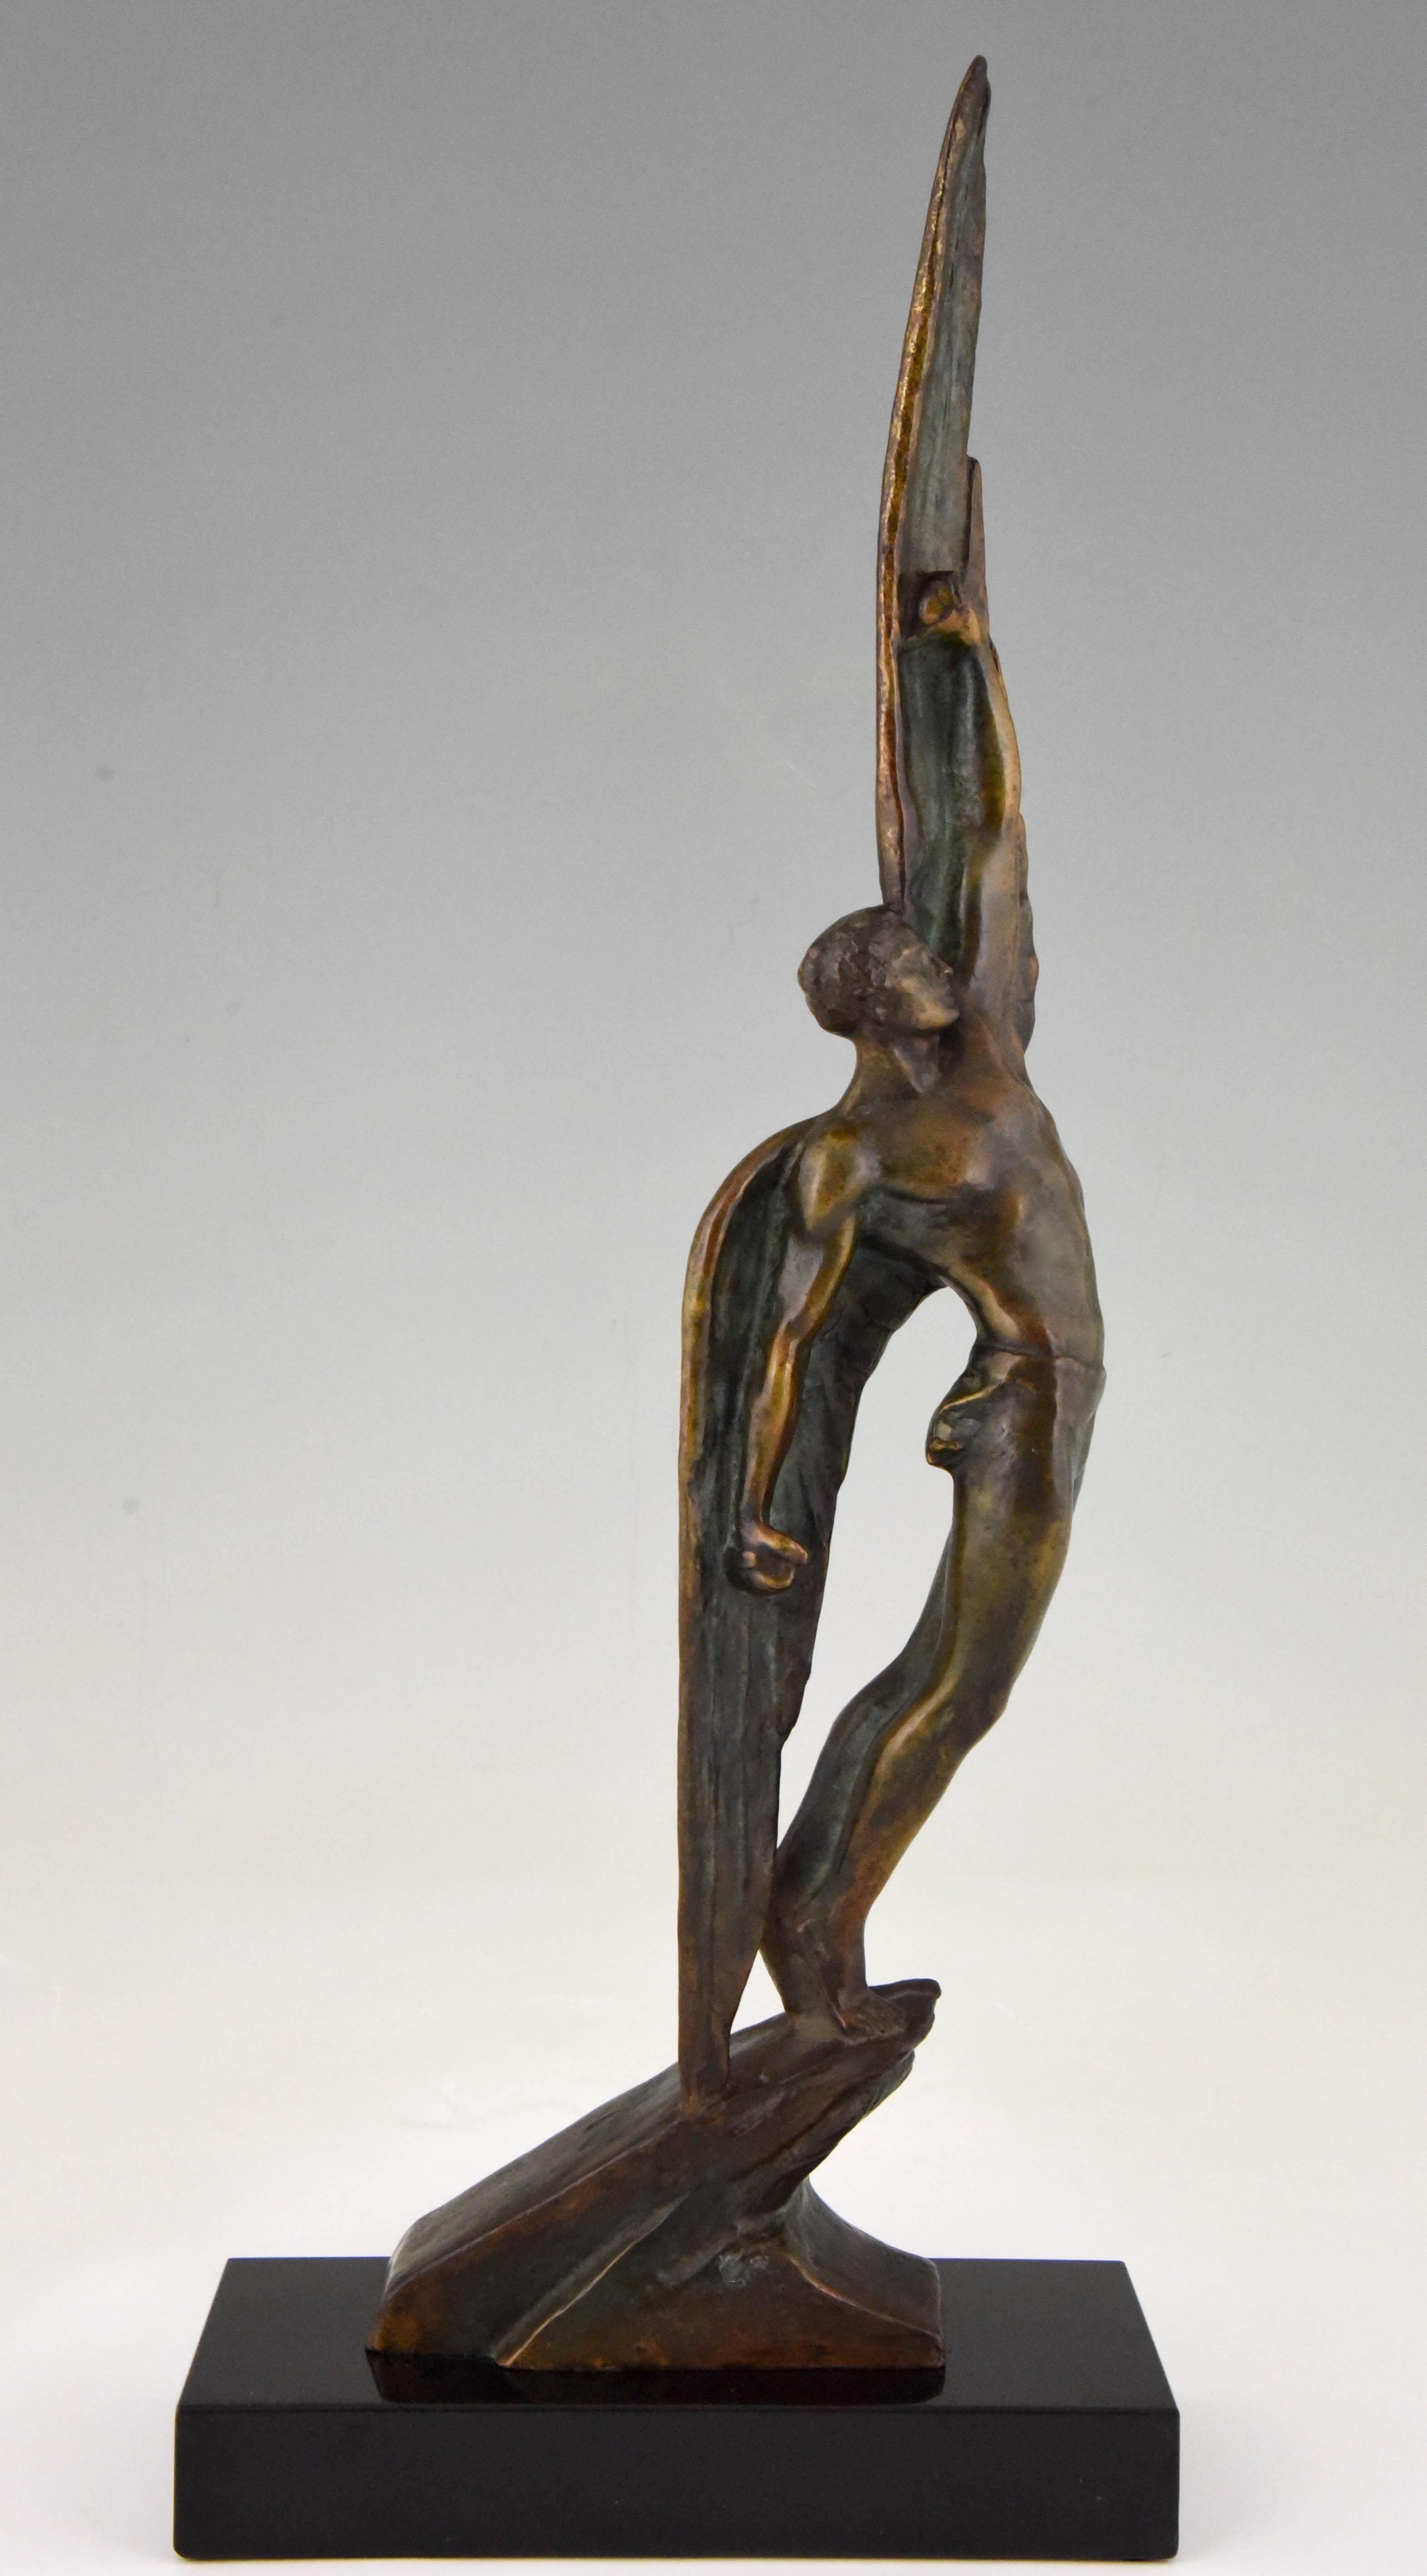 Art Deco bronze sculpture of Icarus a winged male nude standing on a rock. The bronze is signed by the French artist Pierre Le Fagauys, has a lovely patina and stands on a black marble base, circa 1930.

“Bronzes, sculptors and founders” by H.